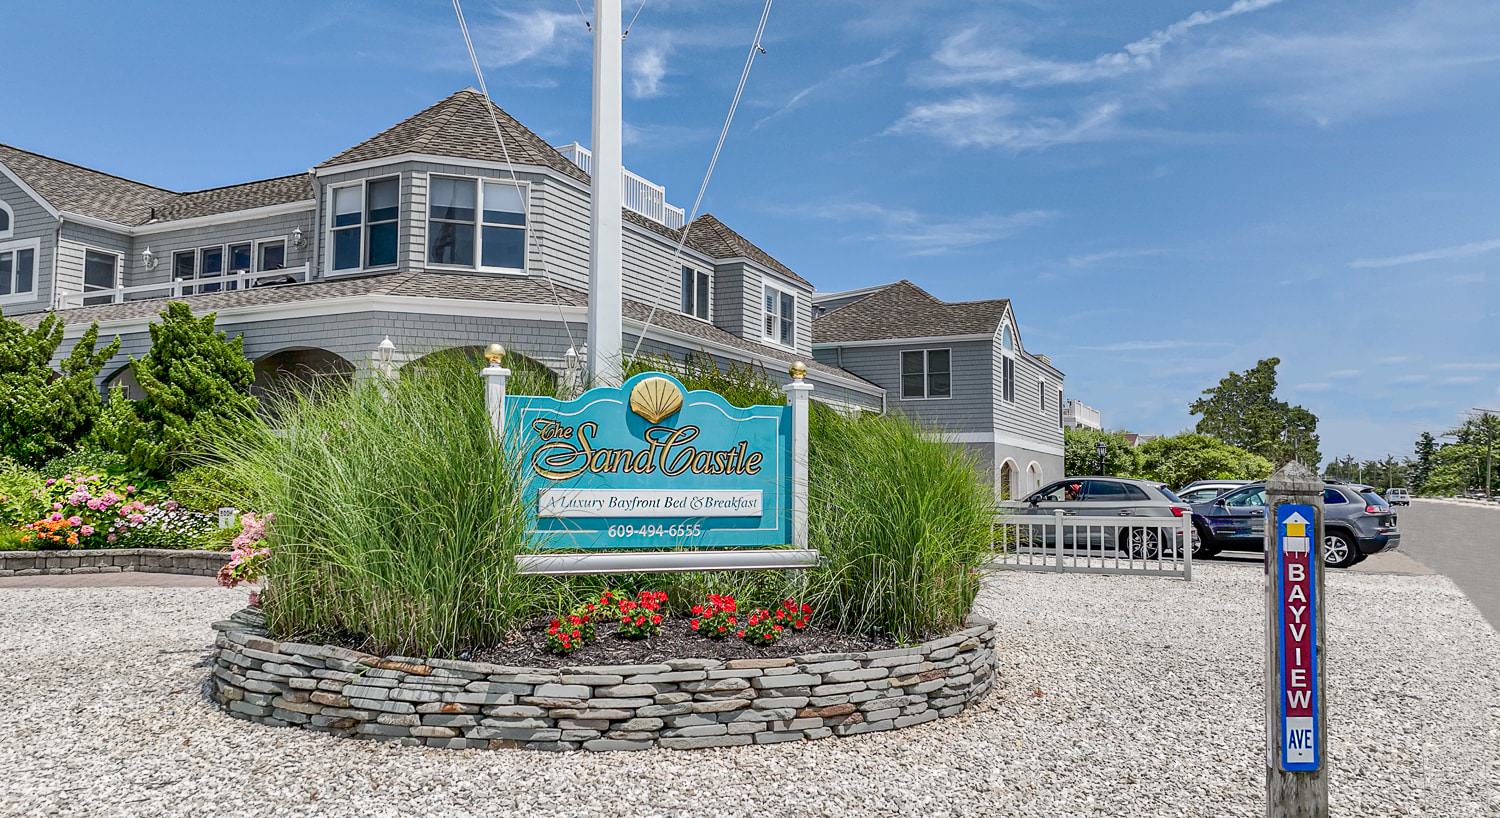 External view of property with light gray shake siding, white trim, green bushes, colorful flower gardens, and sign with property's name